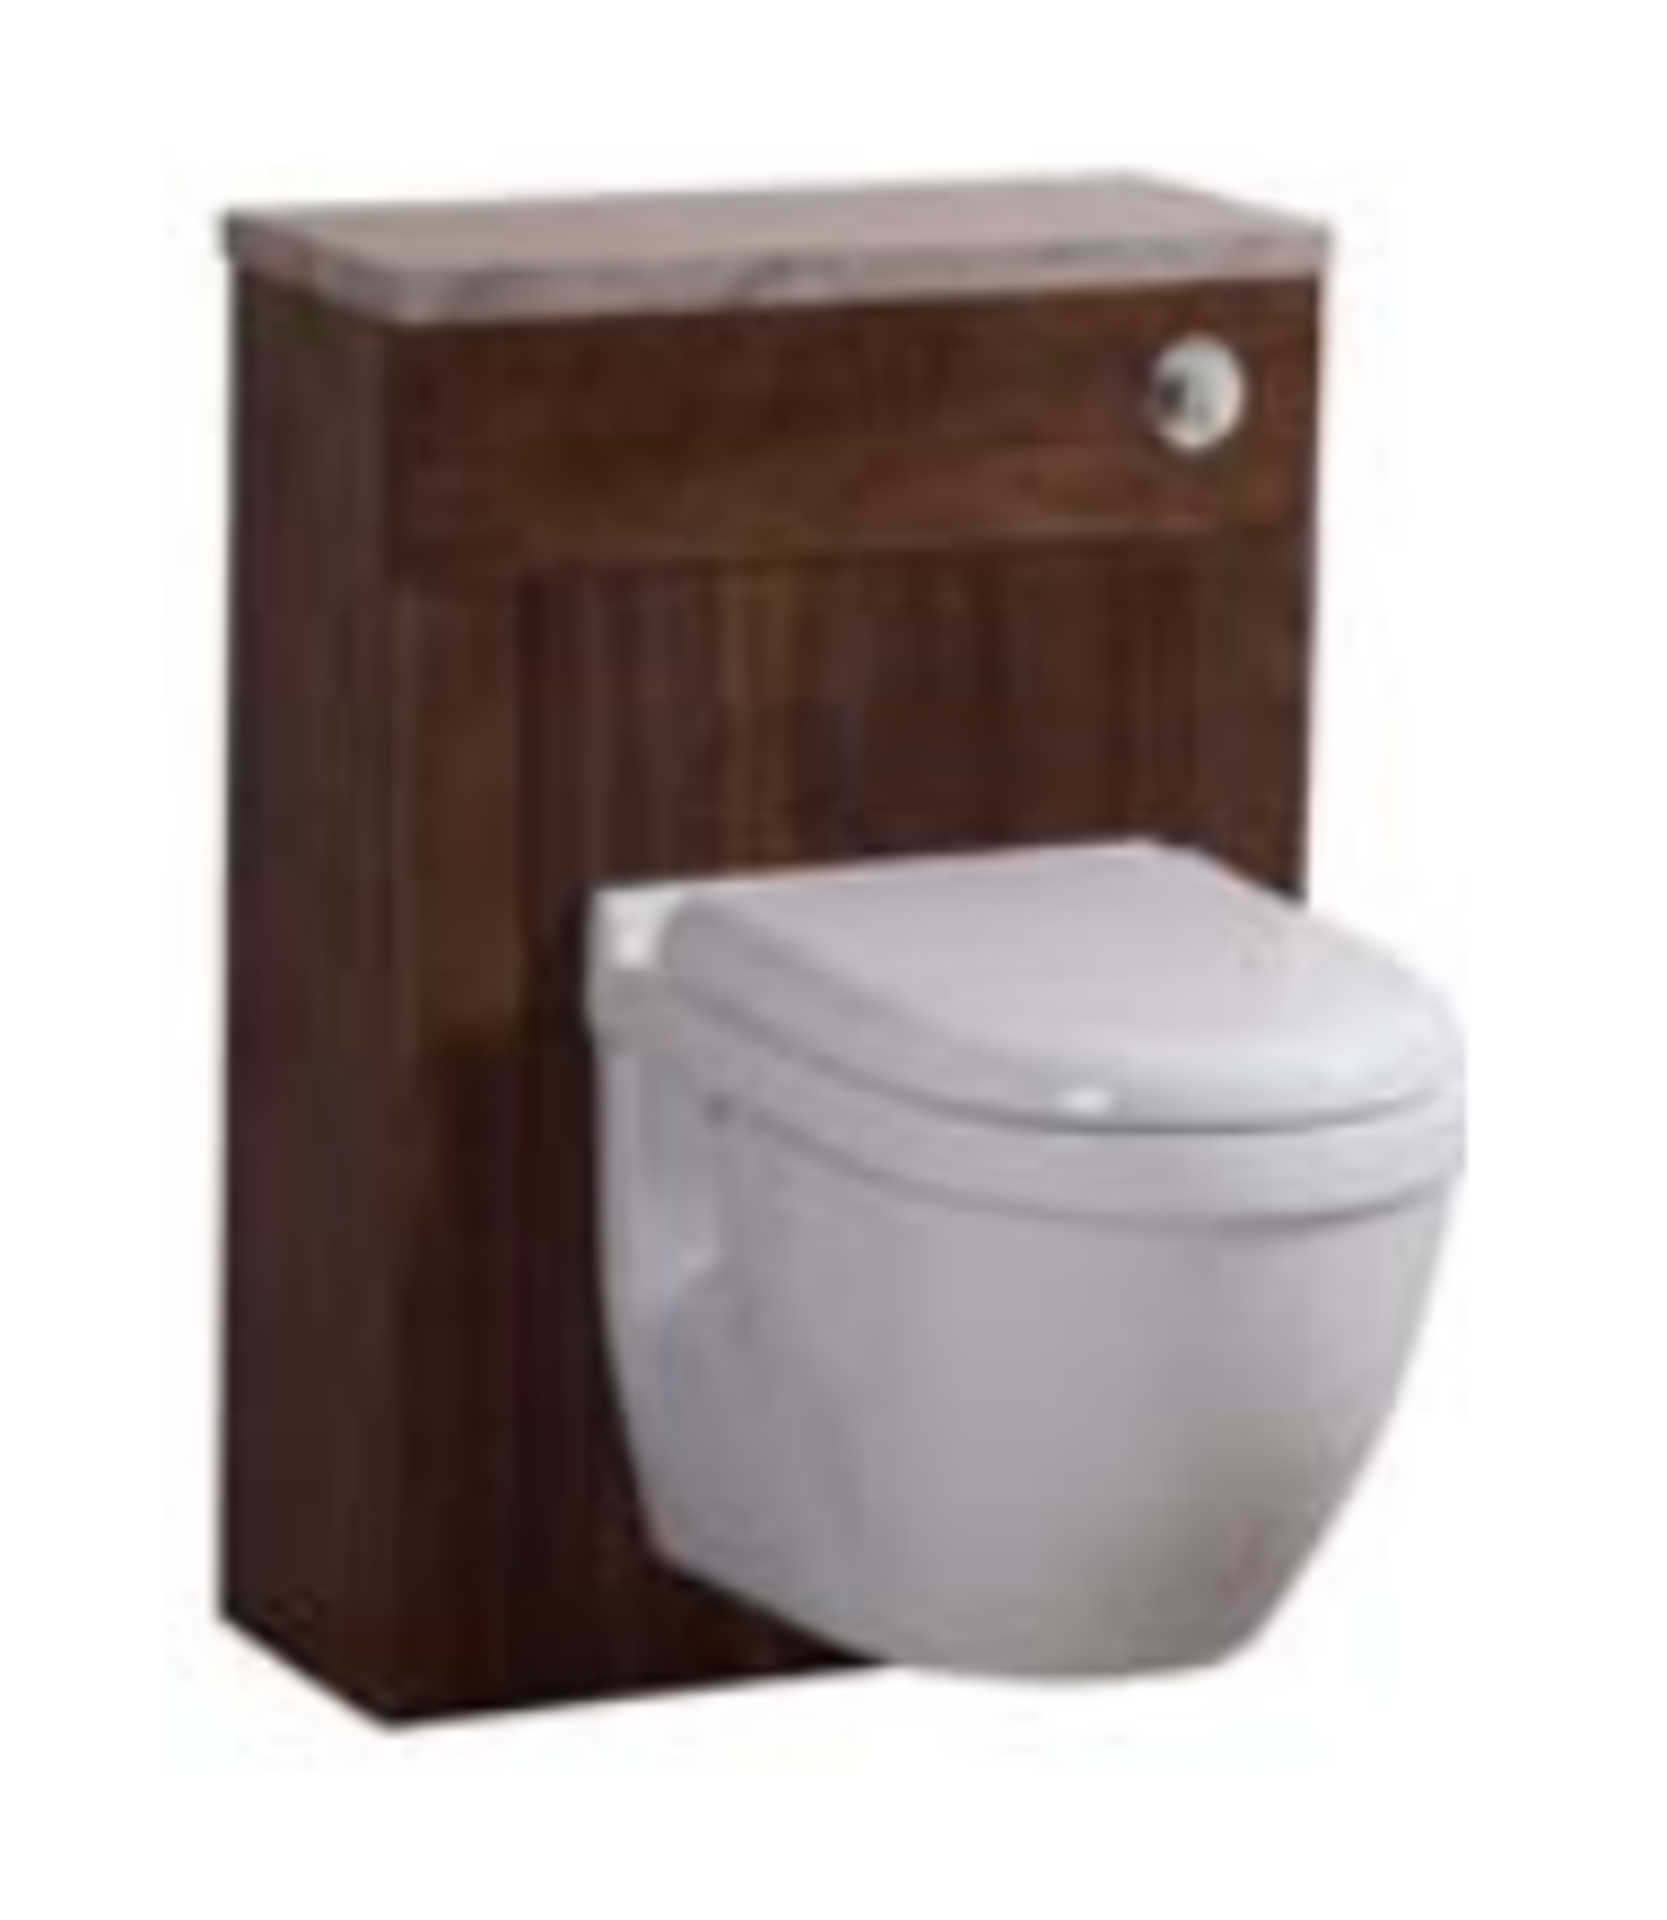 1 x Stonearth WC Toilet Unit With Marble Stone Cover - American Solid Walnut - Original RRP £888 - Image 3 of 10